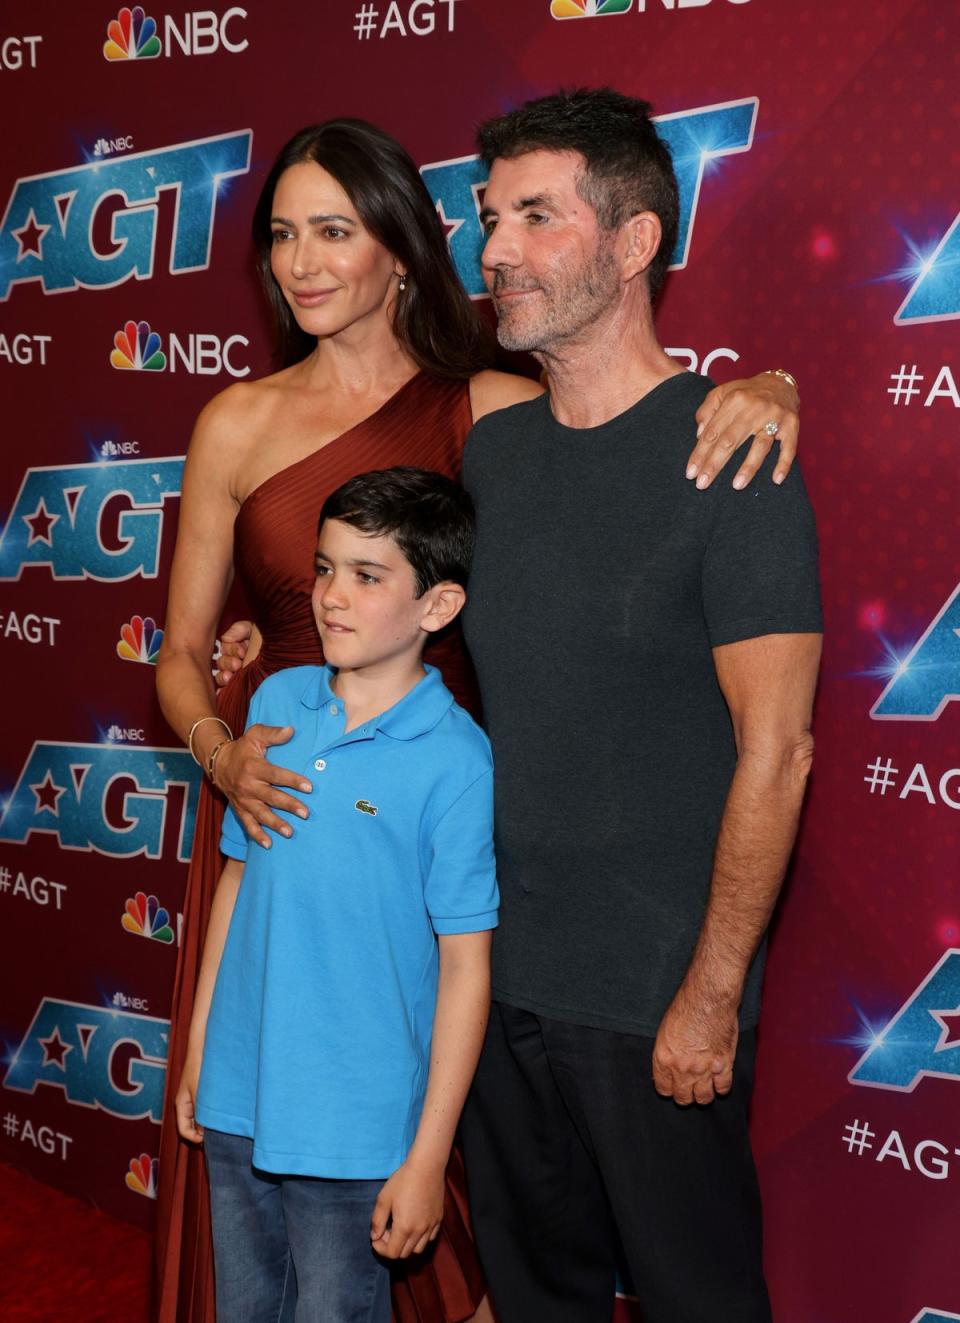 Simon Cowell beamed proudly as he posed with fiancée Lauren Silverman and son Eric (David Livingston/Getty Images)